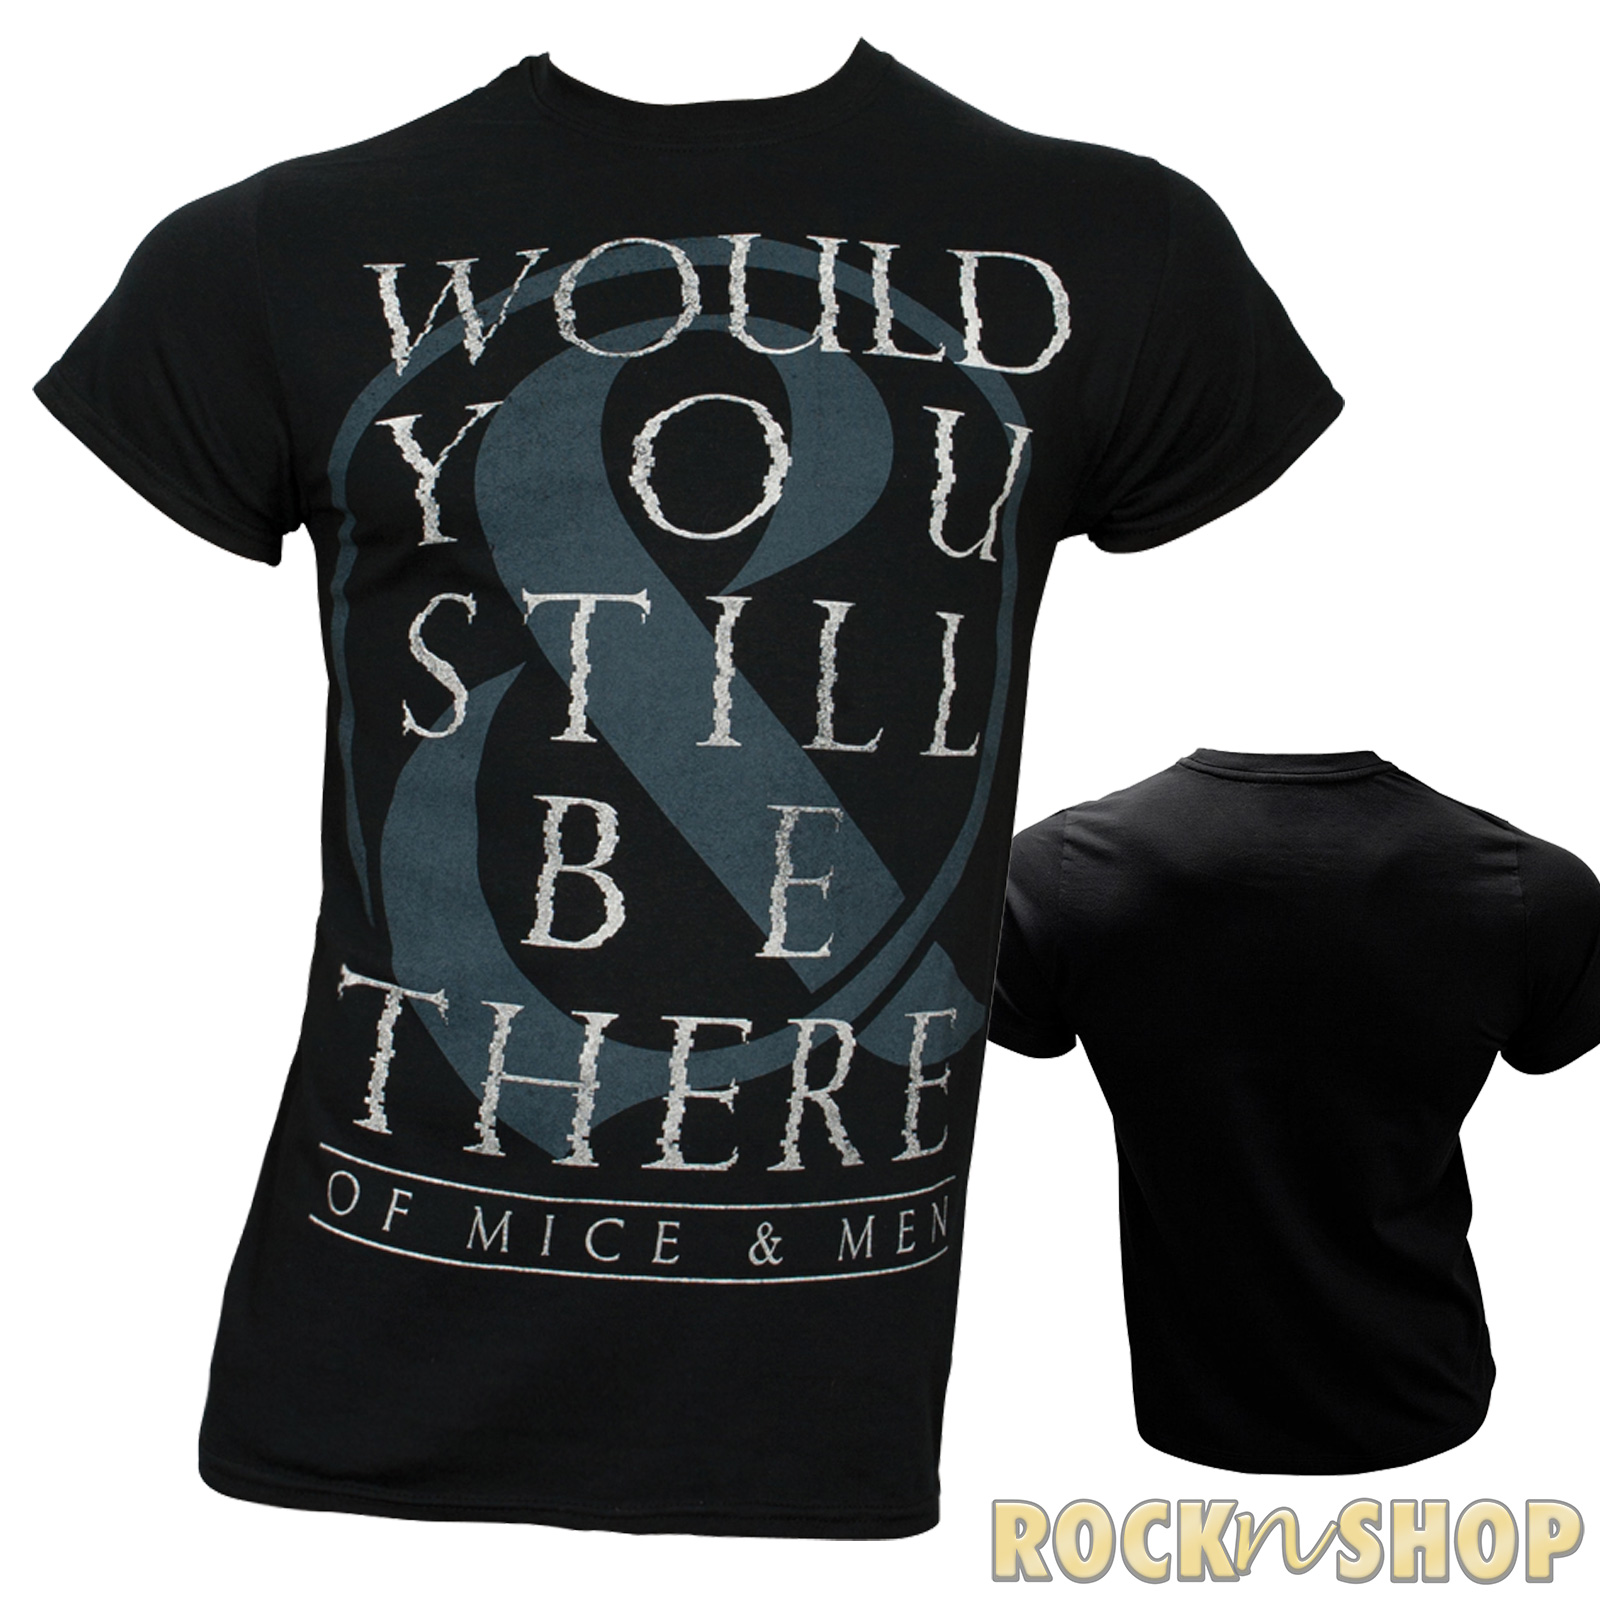 Of Mice & Men - T-Shirt Would You Still Be There - schwarz